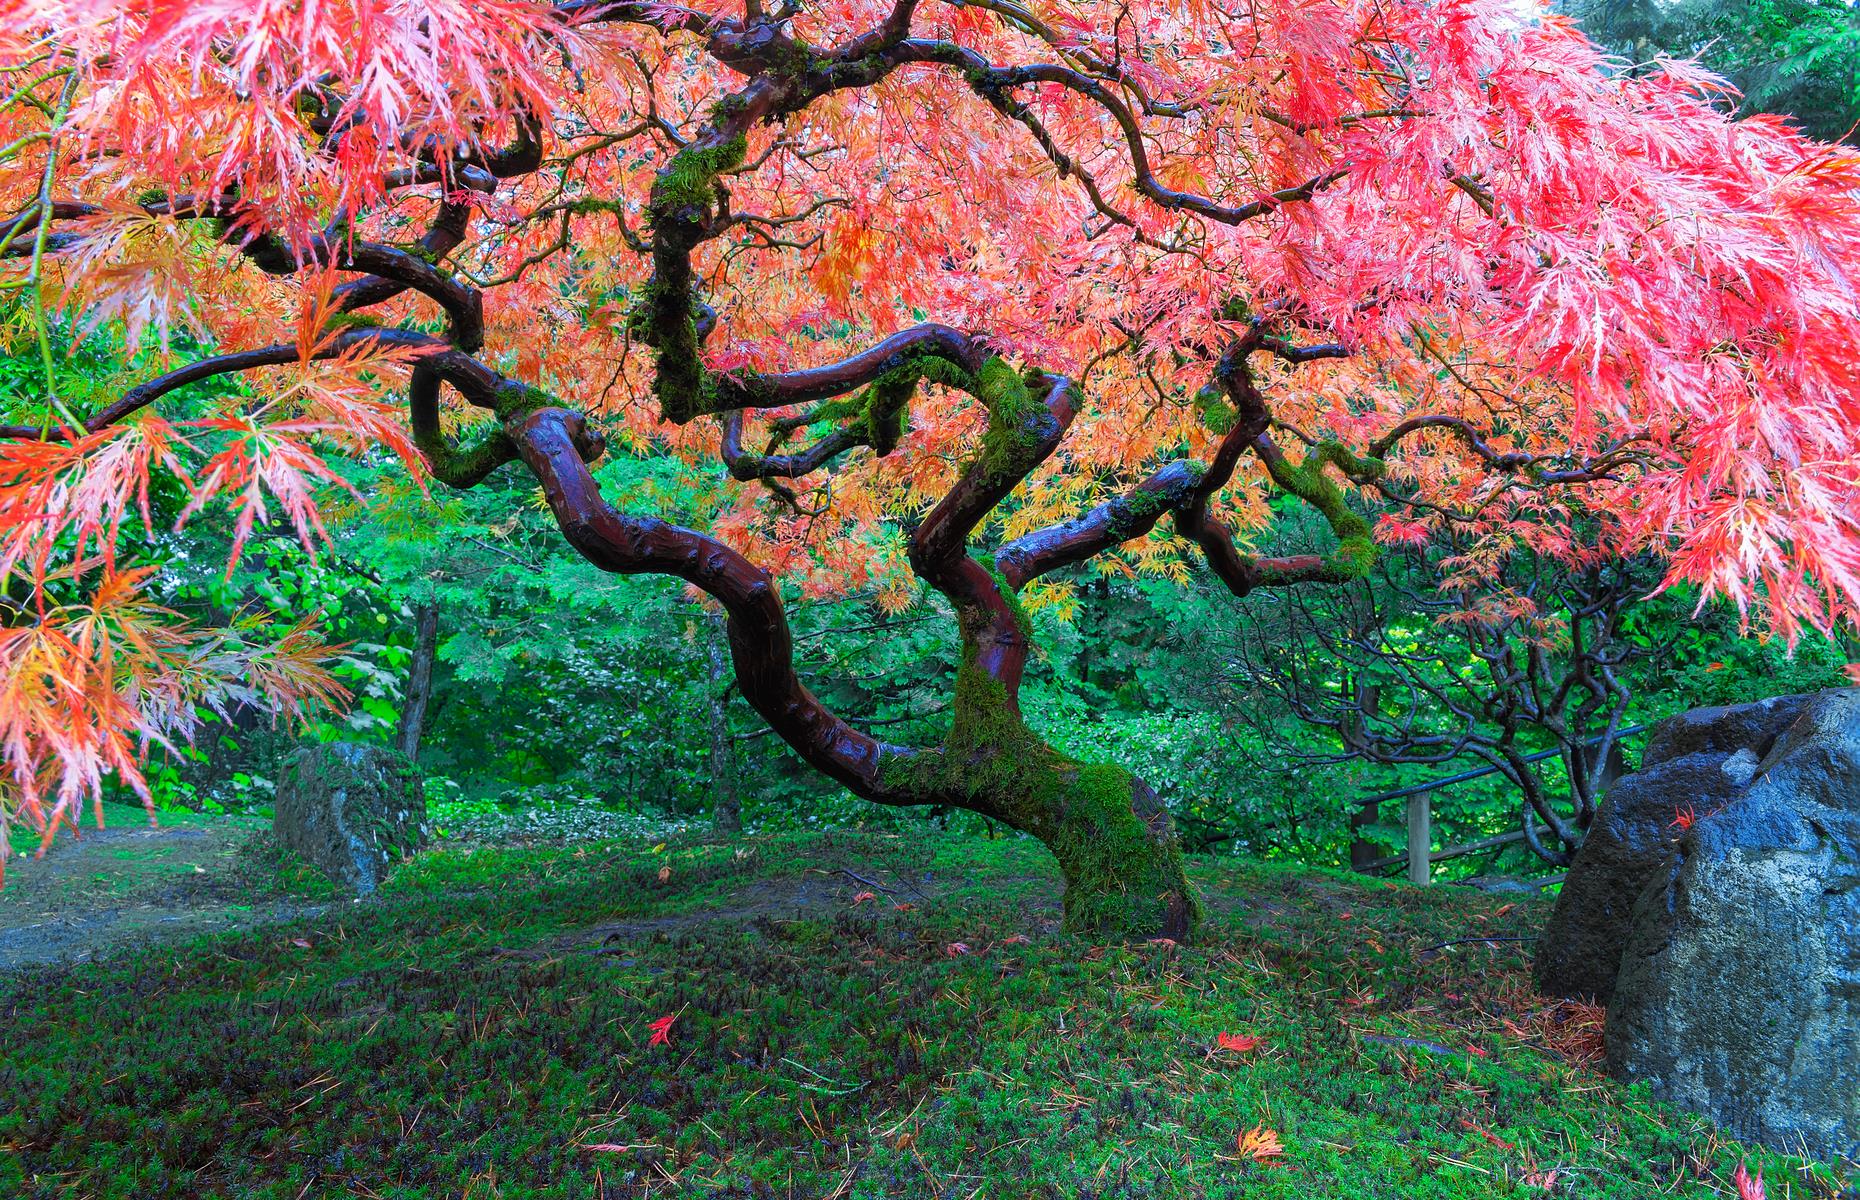 Slide 20 of 27: The Portland Japanese Garden is often tipped as one of the most authentic Japanese gardens outside of Japan itself, and its graceful Japanese maple, located in the Strolling Pond Garden, really steals the show. It's at its most spectacular in fall, when it comes to life in all its fiery red and orange glory.